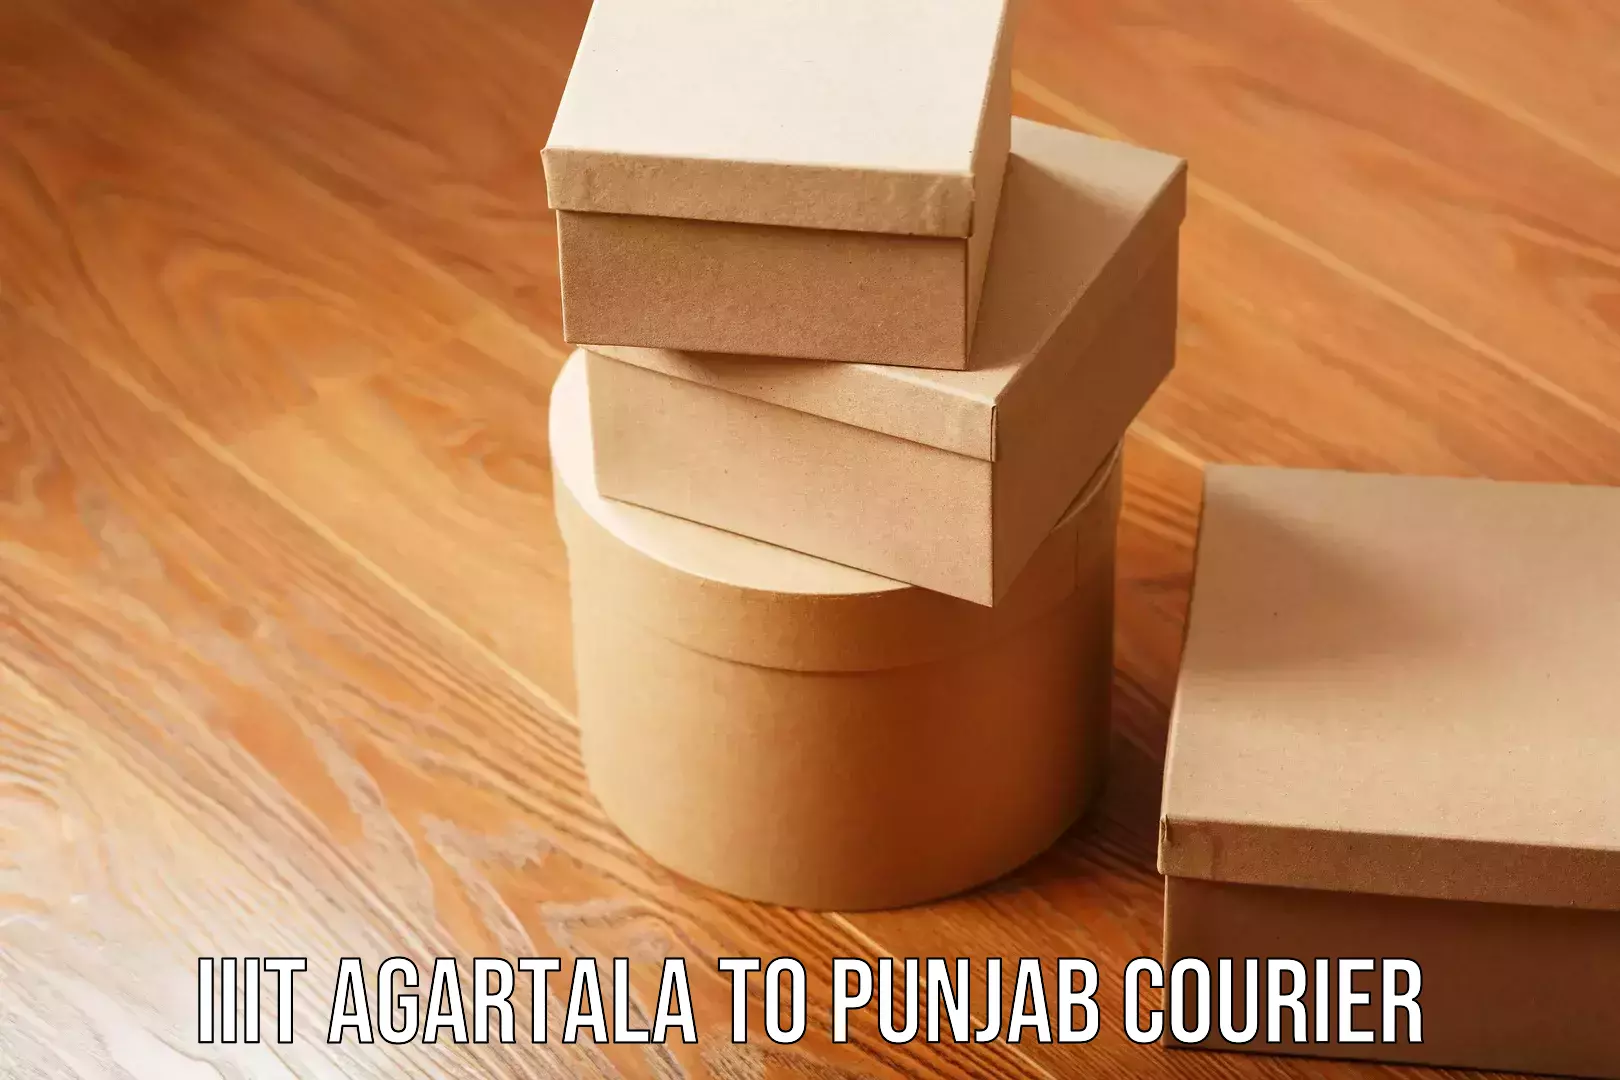 Easy access courier services IIIT Agartala to Punjab